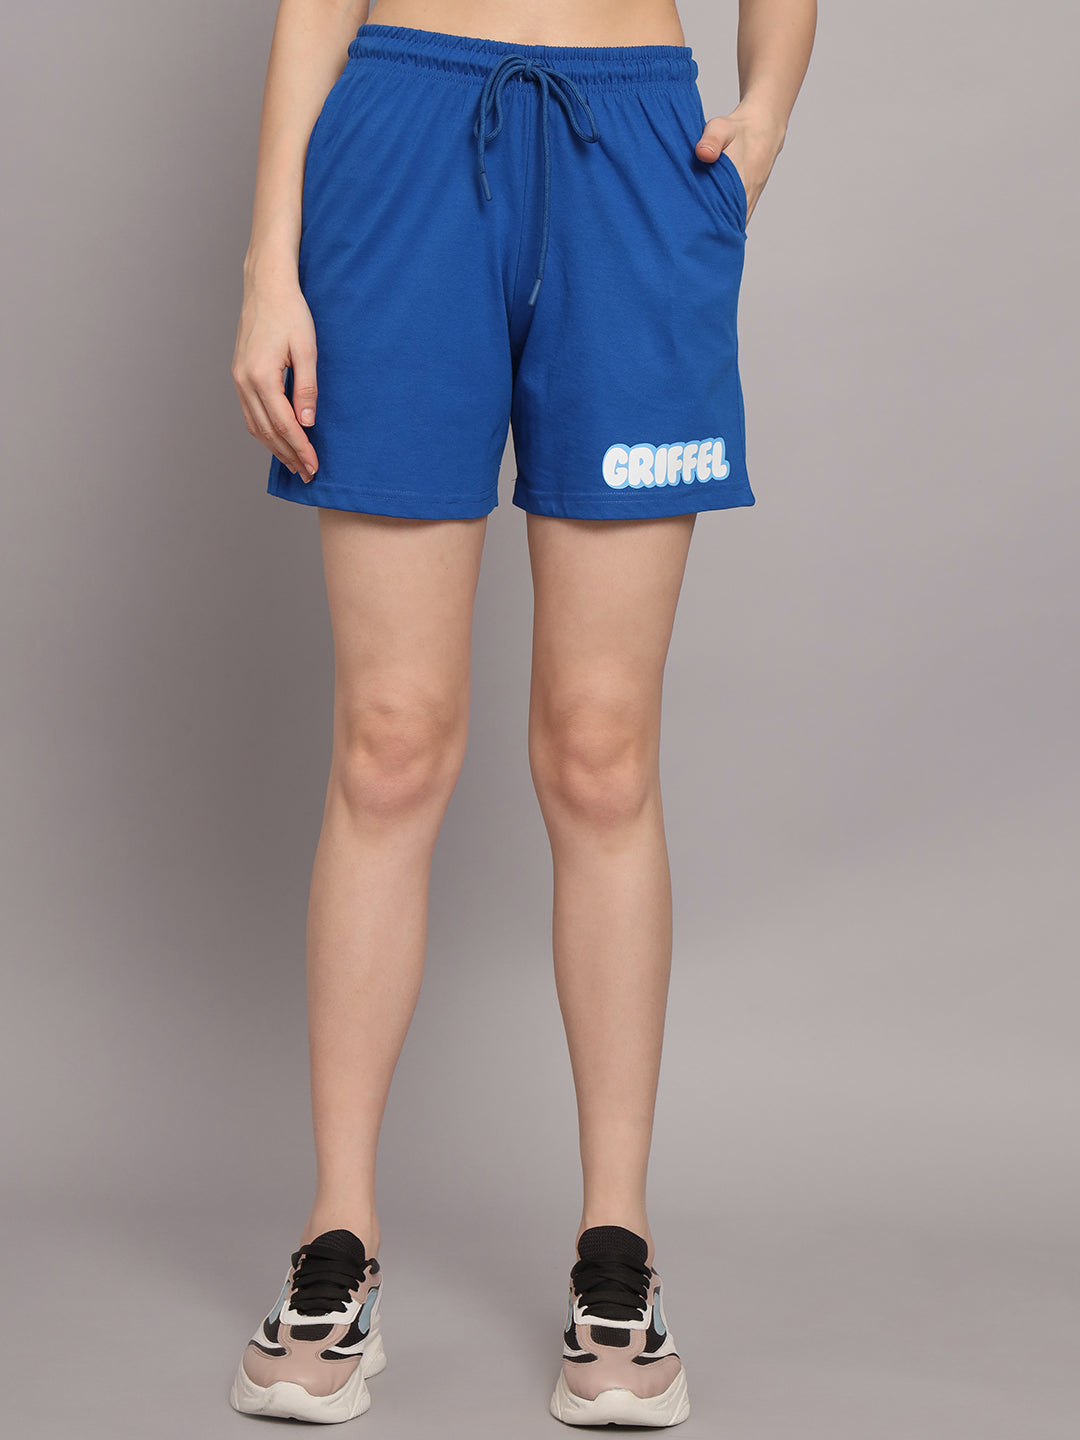 GRIFFEL Women Printed Loose fit Royal T-shirt and Short Set - griffel